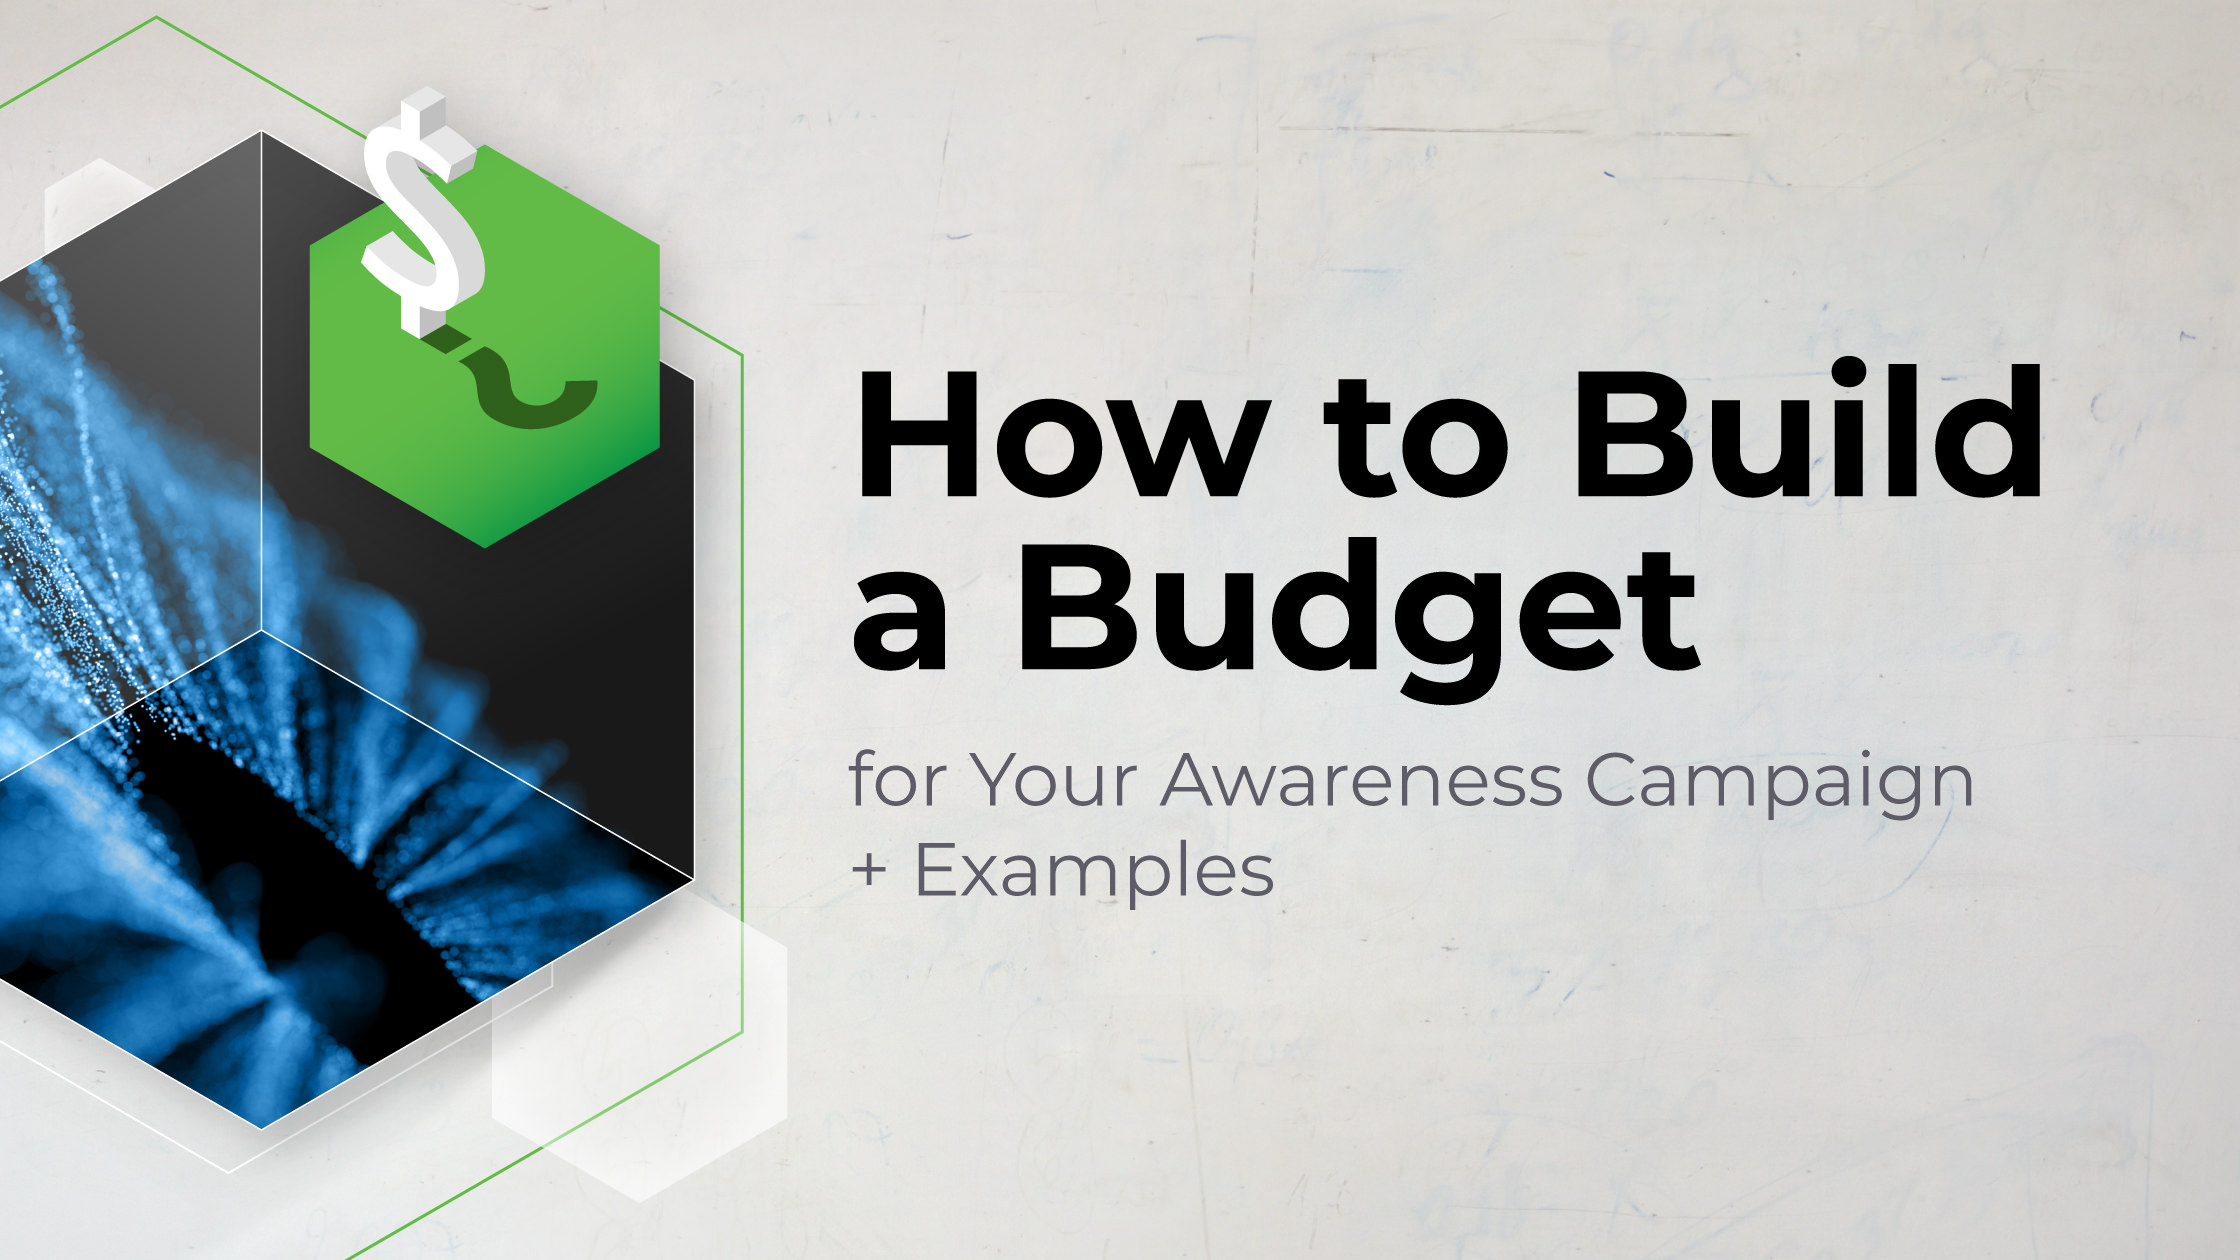 How to Build a Budget for Your Awareness Campaign